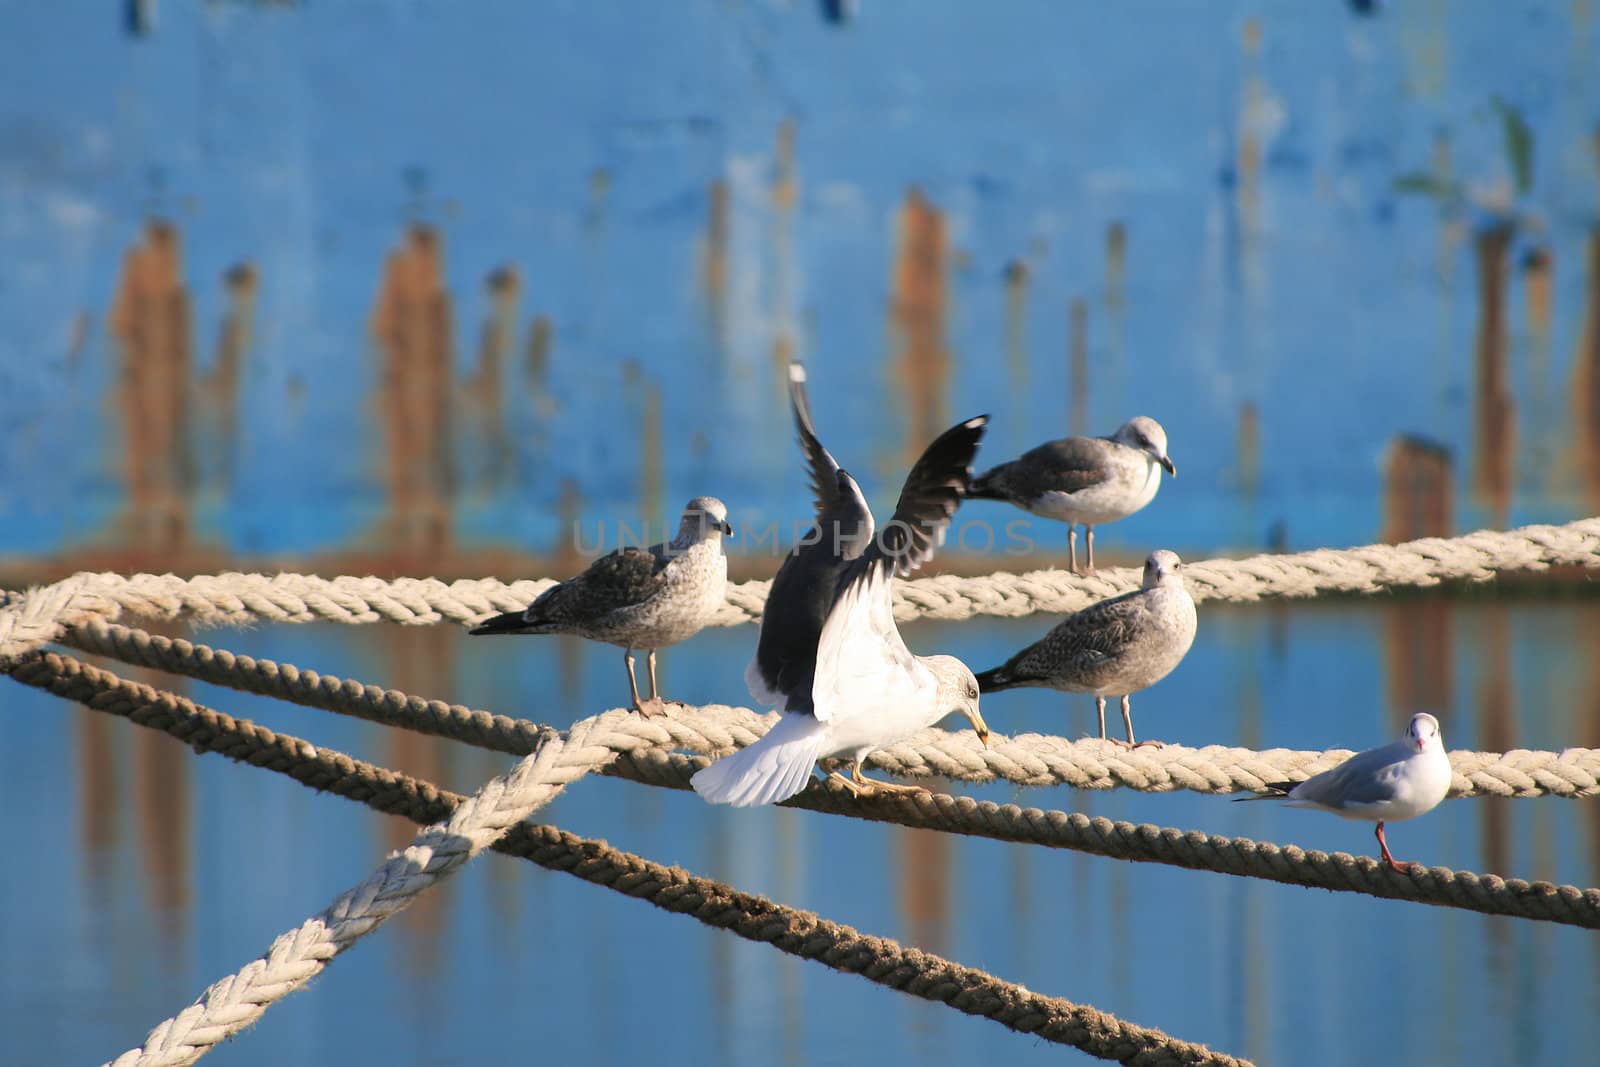 Seagulls resting into the ropes